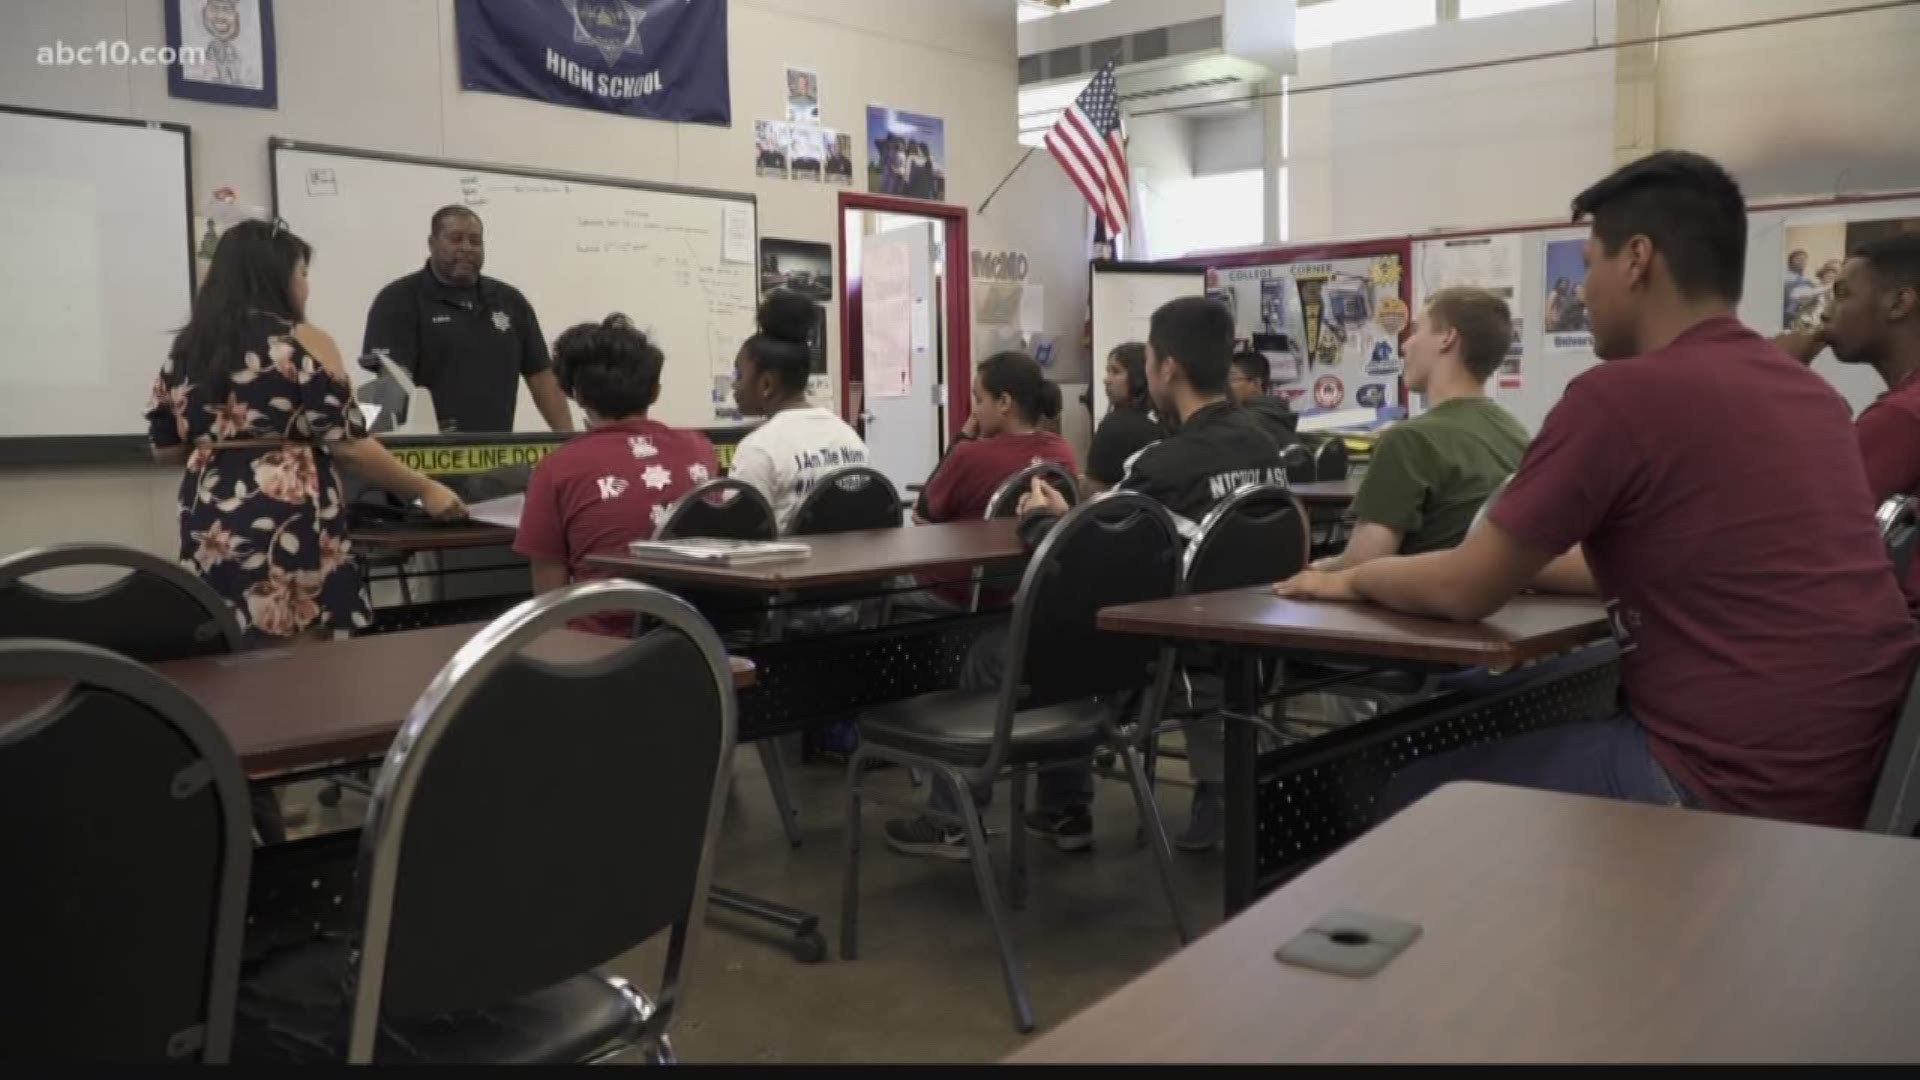 What's Working: A High school program is helping address police trust issues.